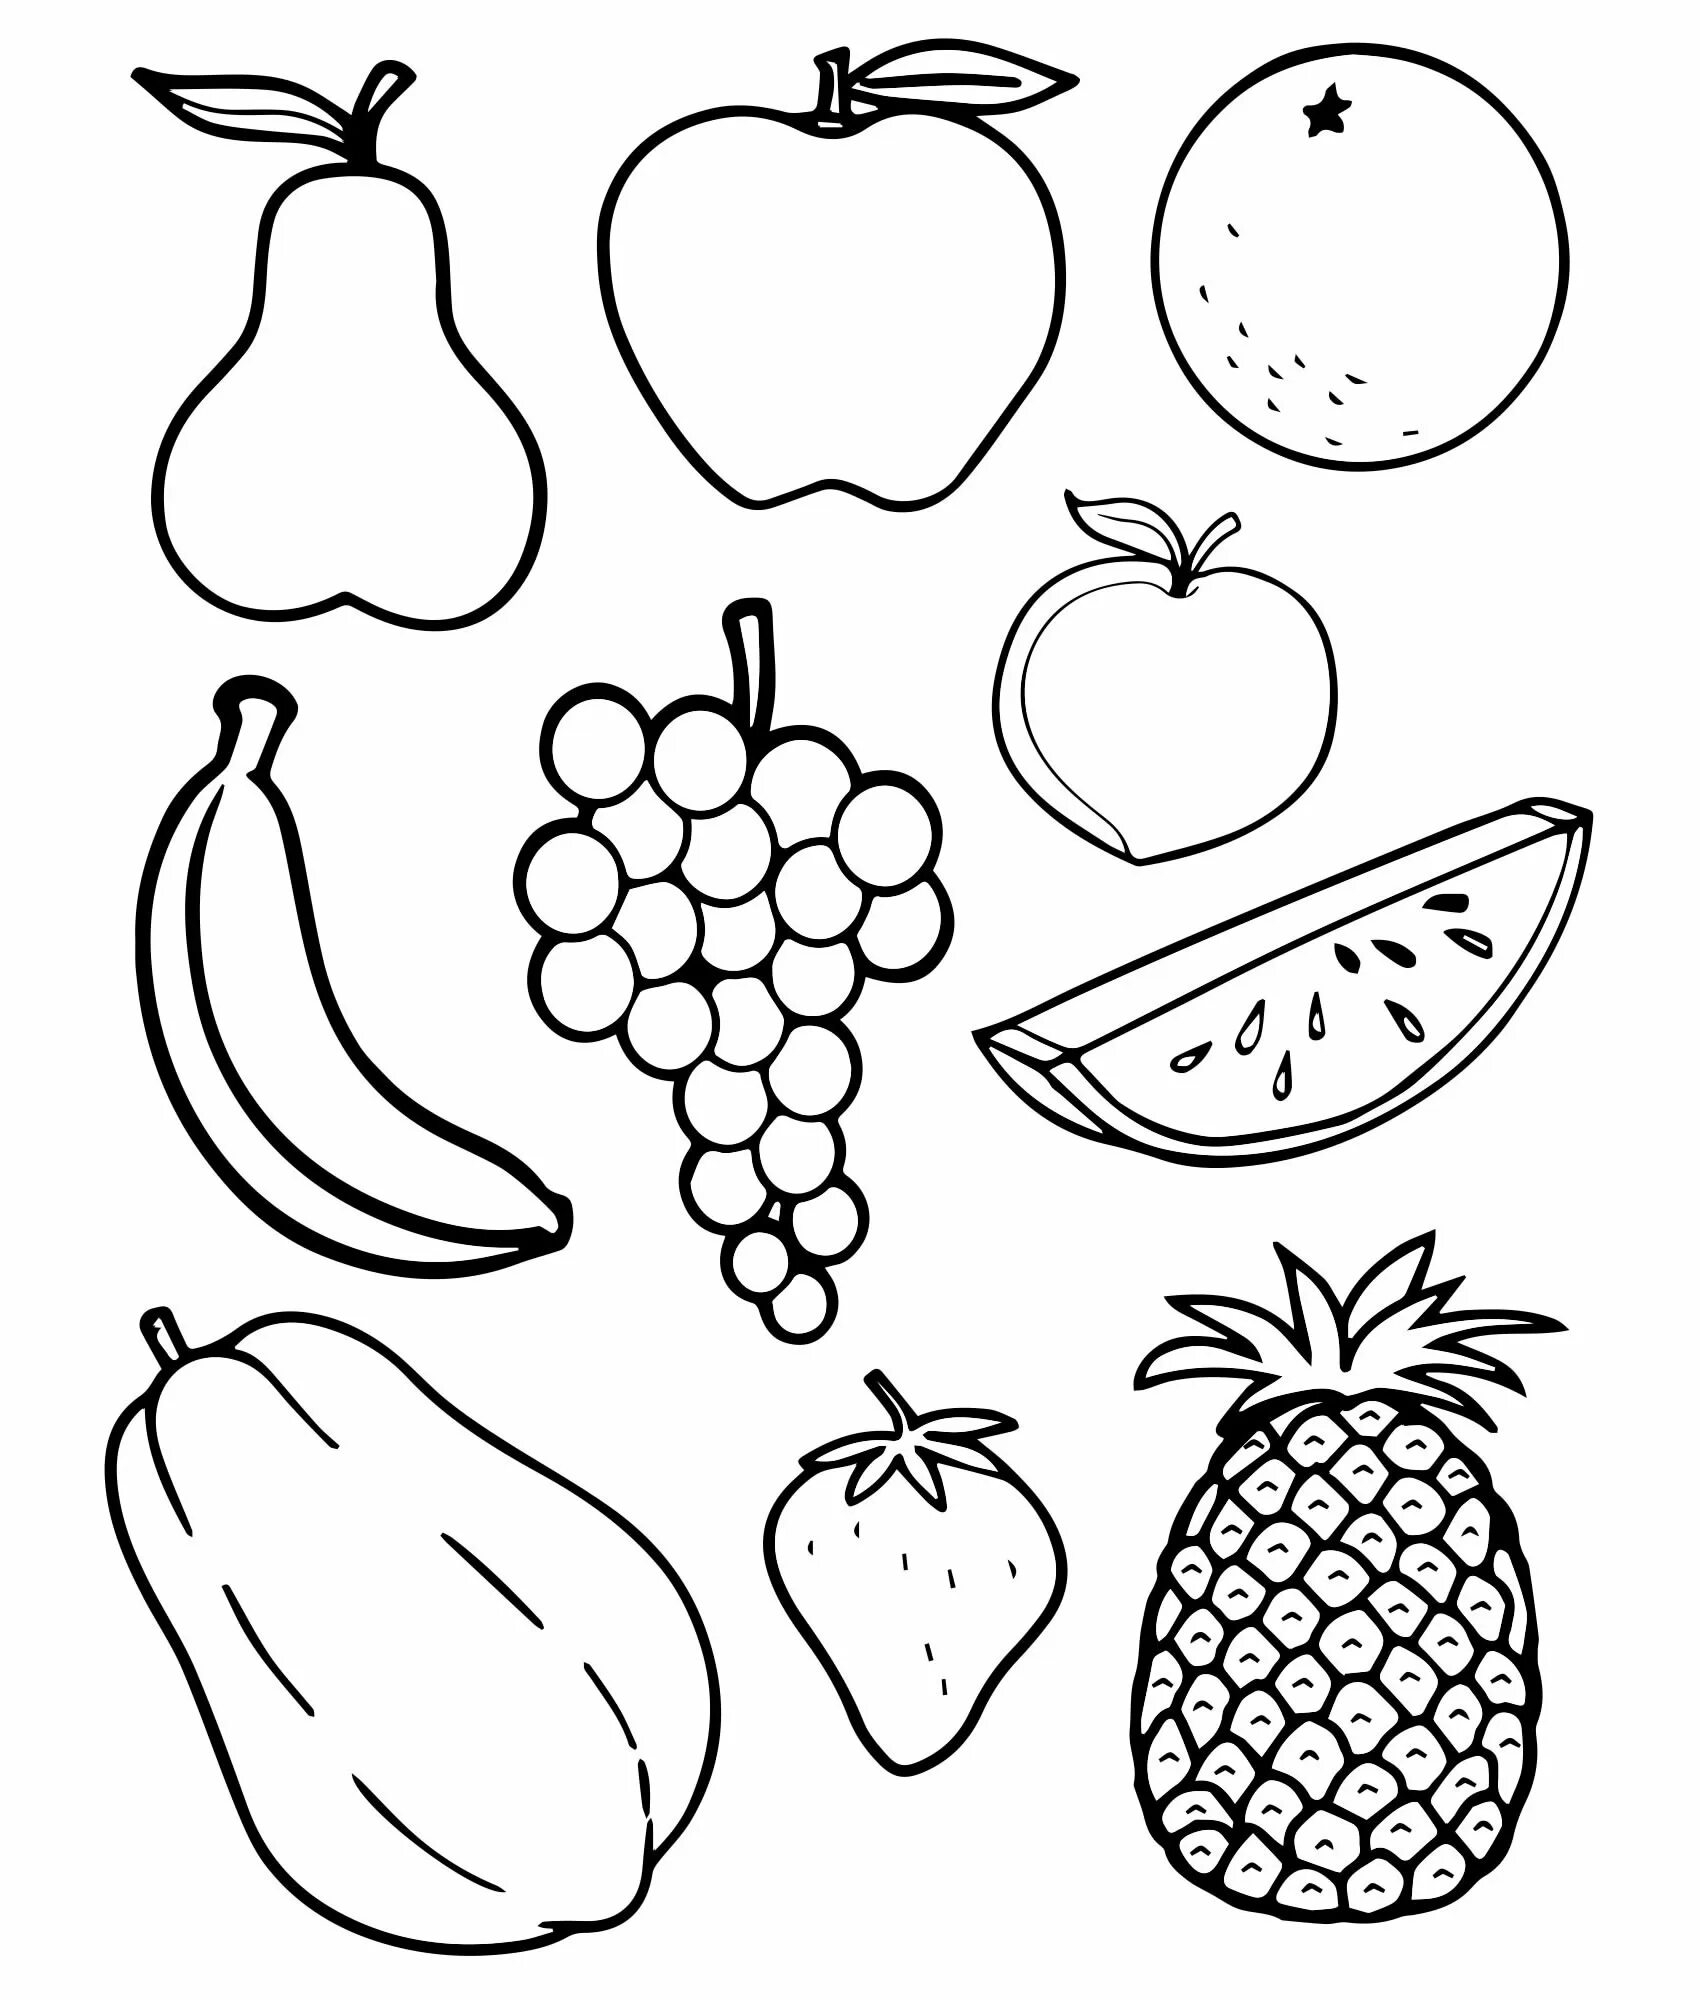 Fabulous fruits and vegetables coloring book for kids